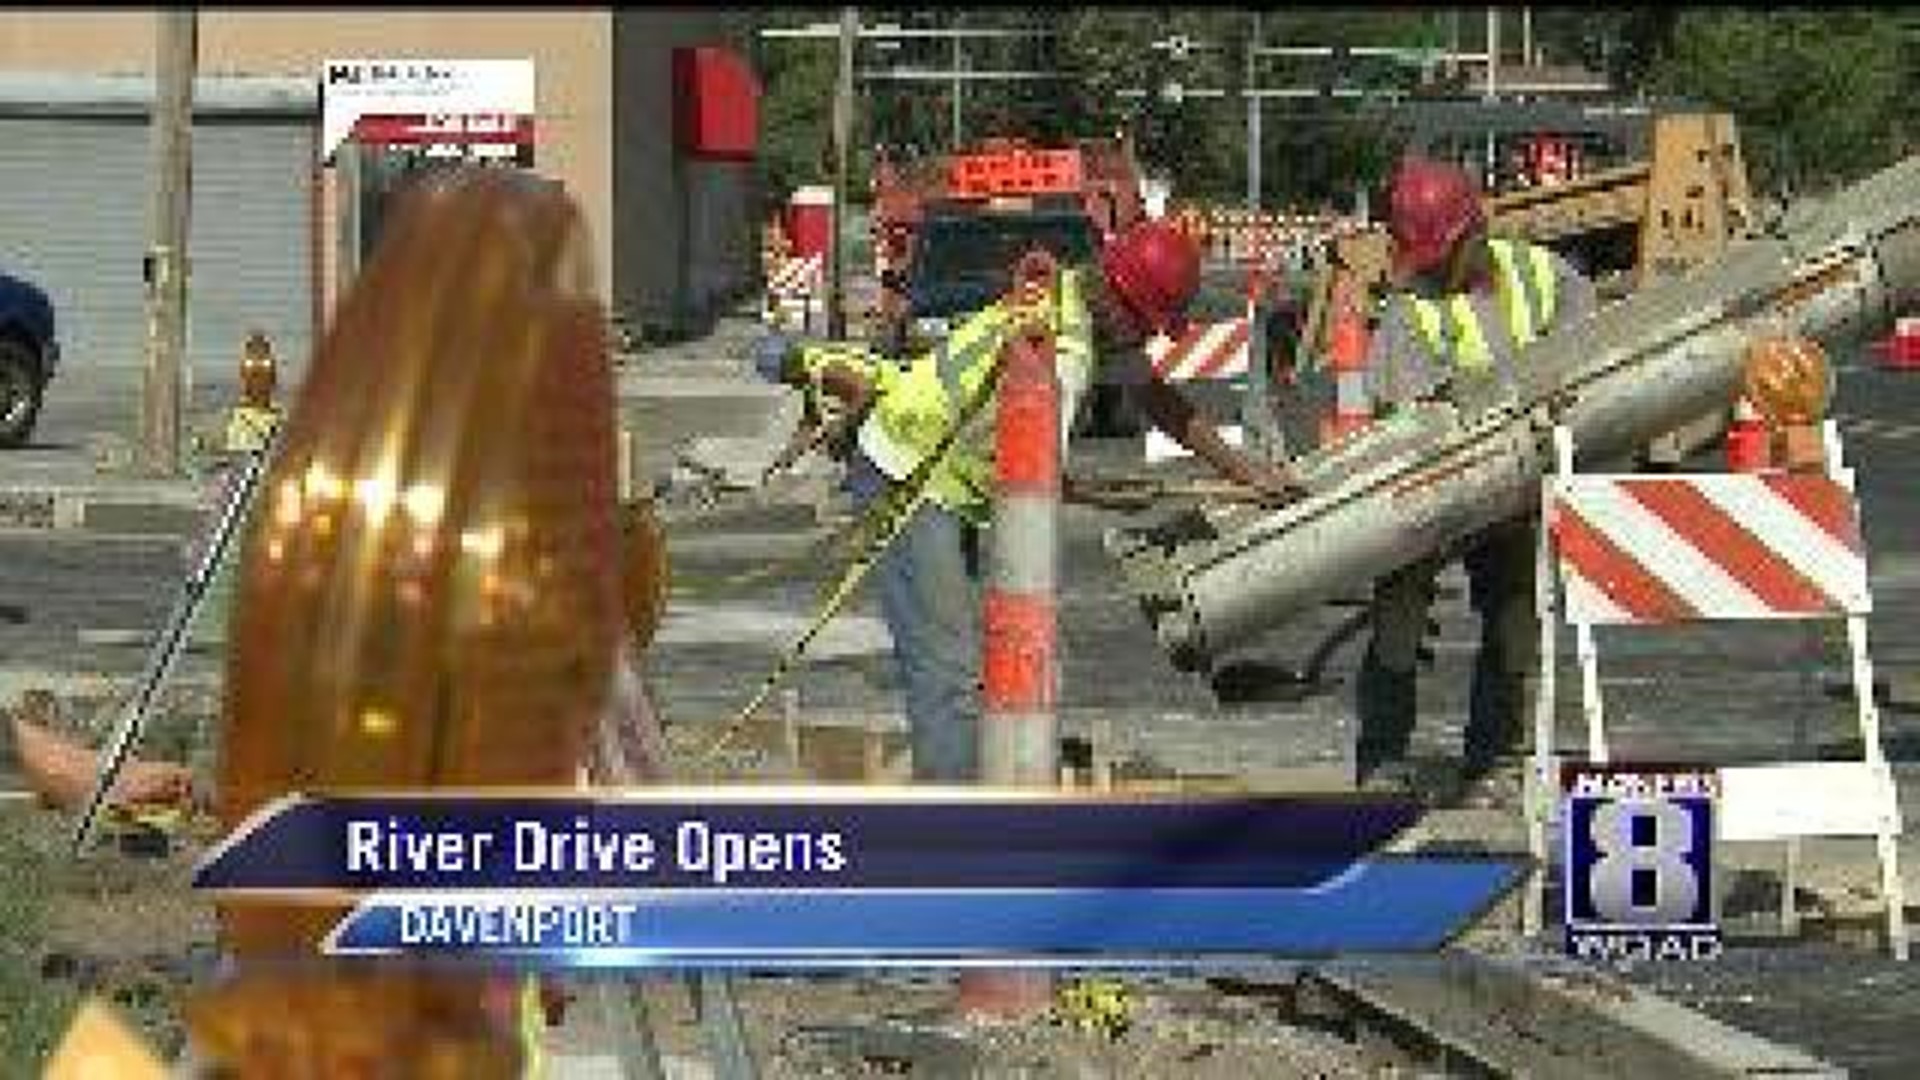 River Drive set to open